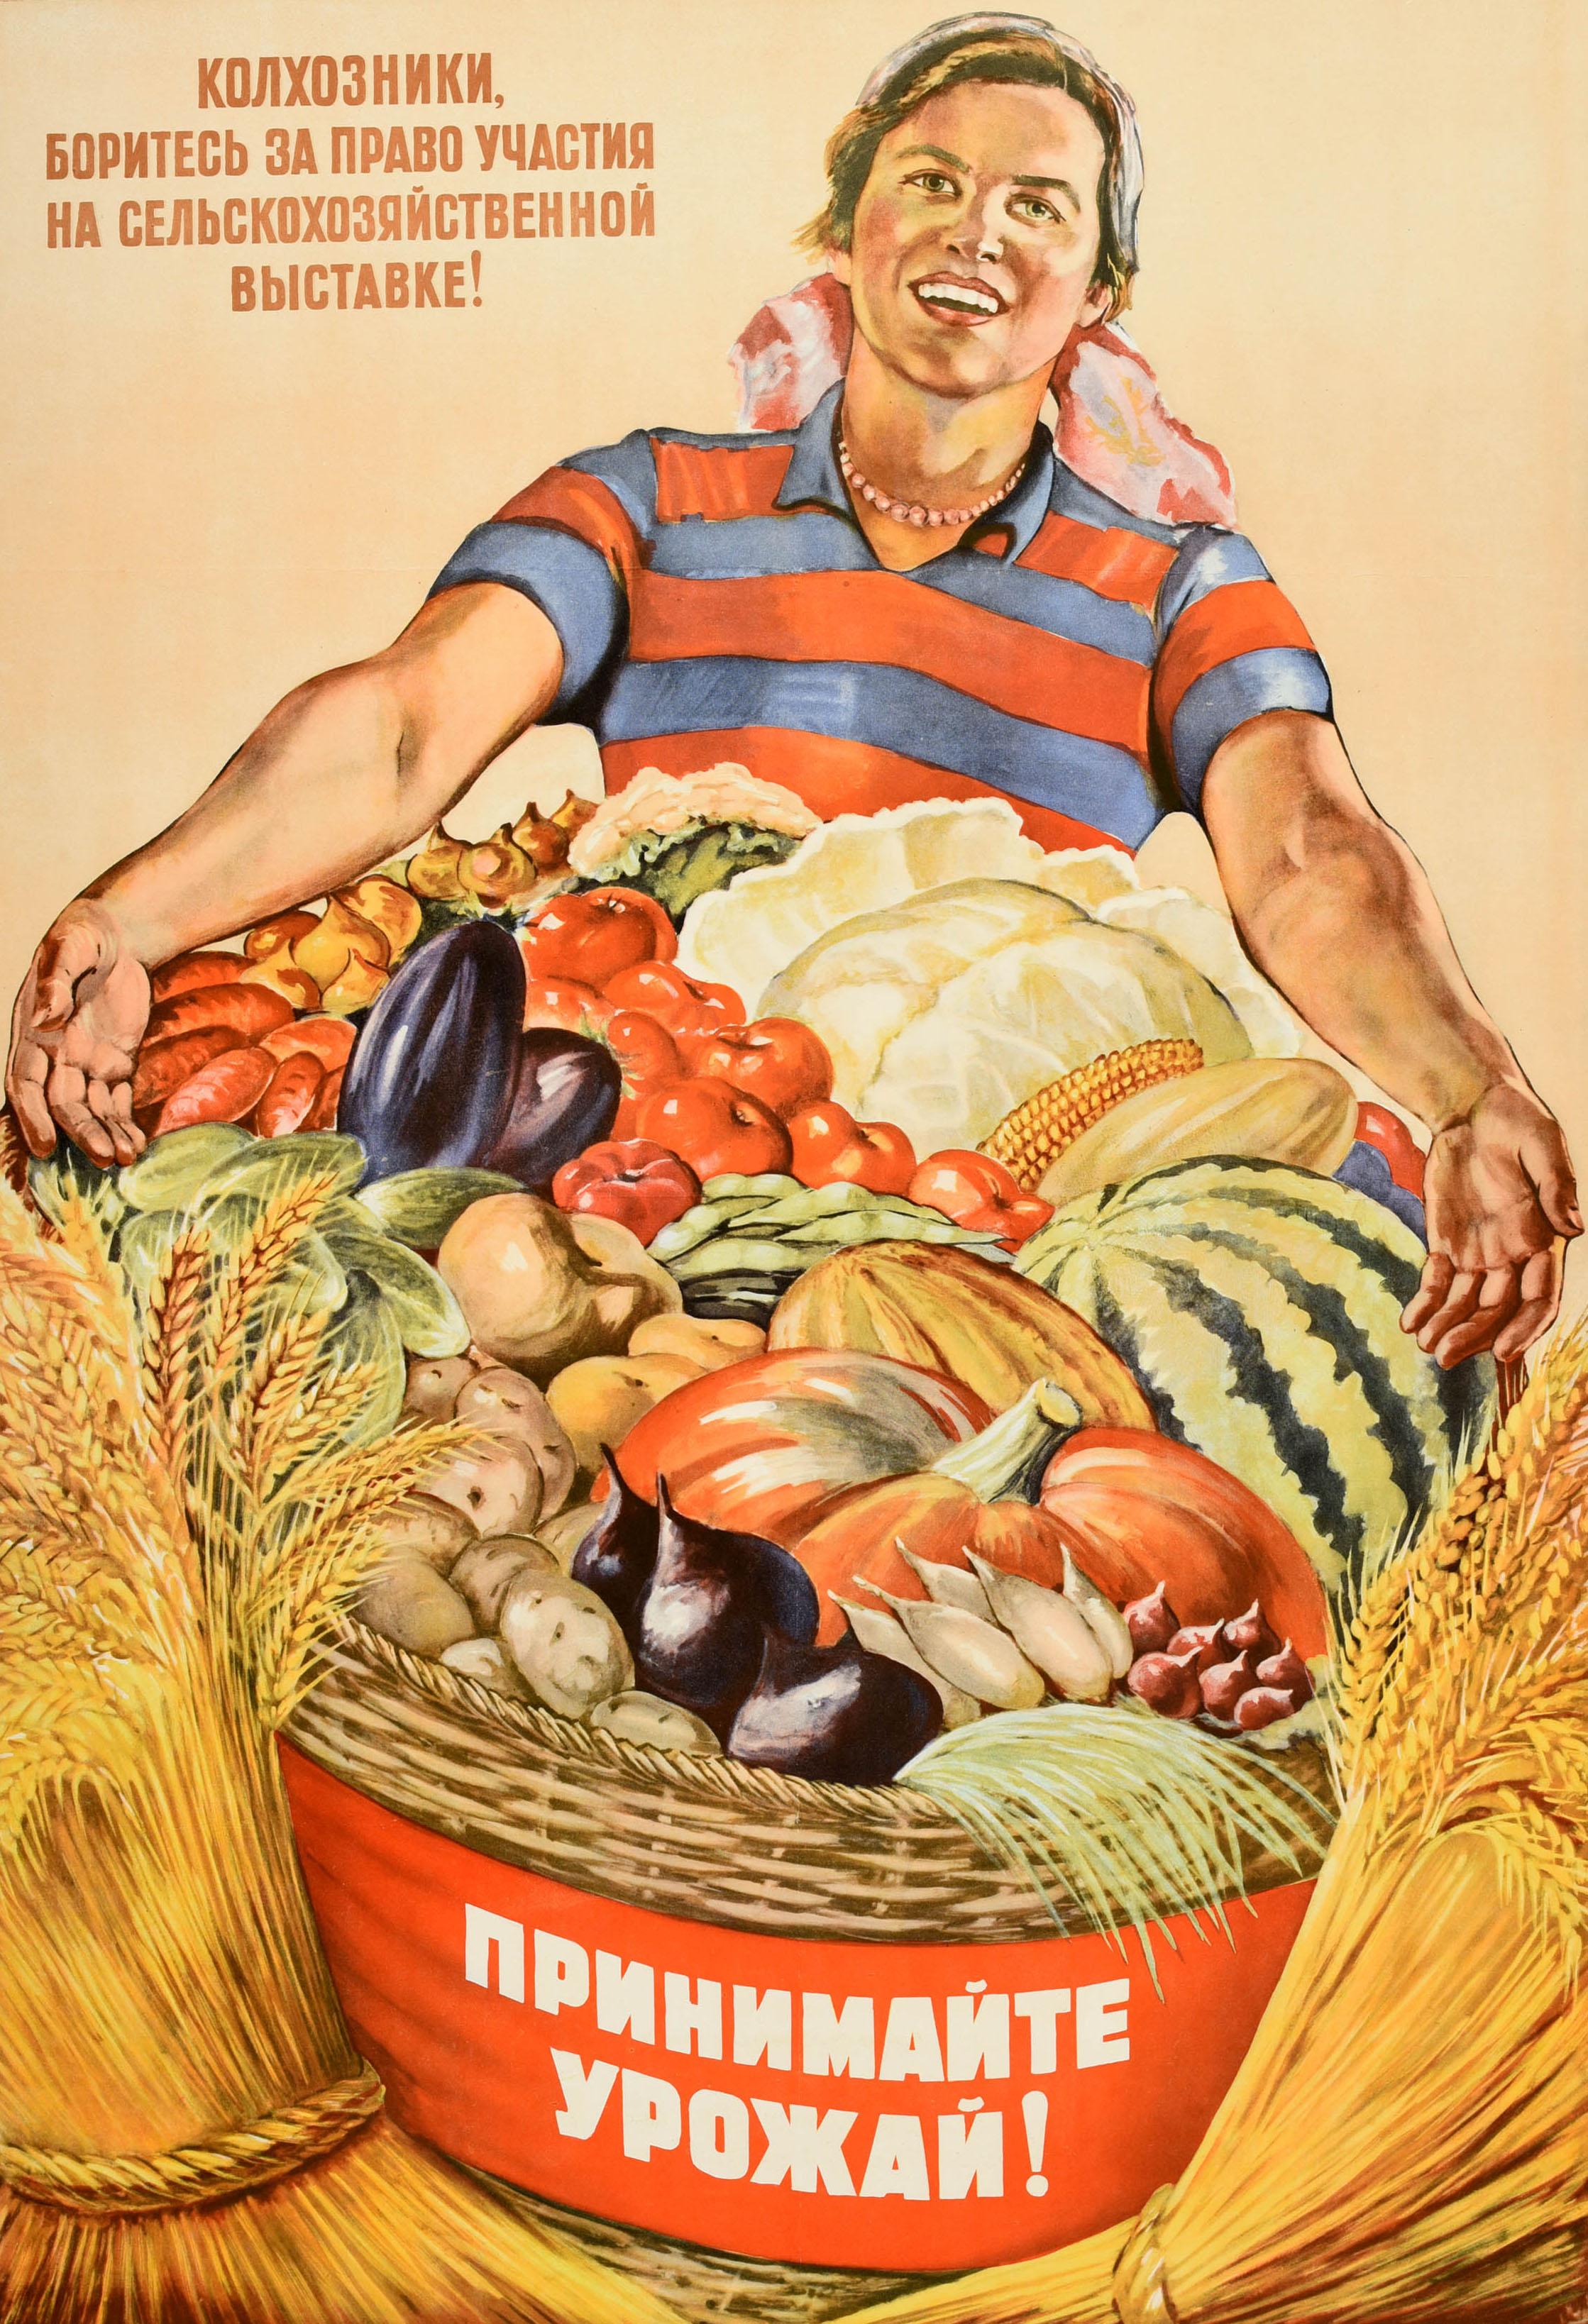 Original vintage Soviet food propaganda poster - Accept the Harvest! / ?????????? ??????! - featuring a smiling lady showing the viewer a large basket full of fruit and vegetables including a watermelon, pumpkin, cabbage, carrots, tomatoes and